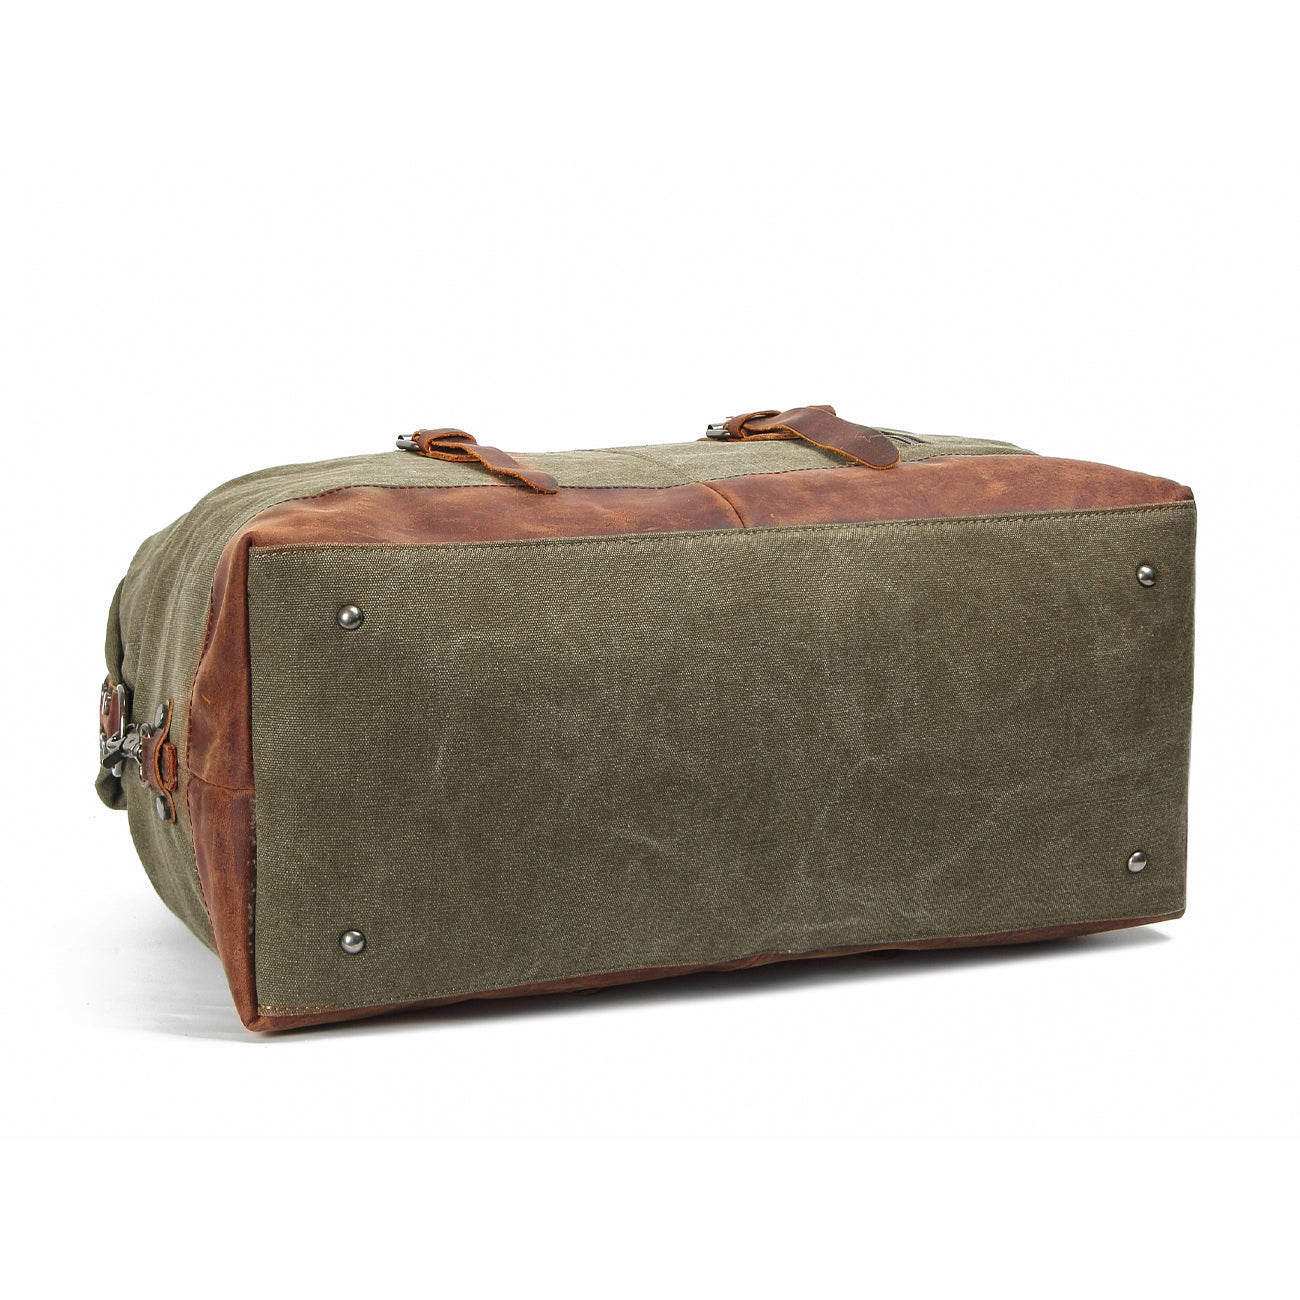 roomy and handy interior compartments with zipped and slot pockets and cotton liner of a vintage travel luggage